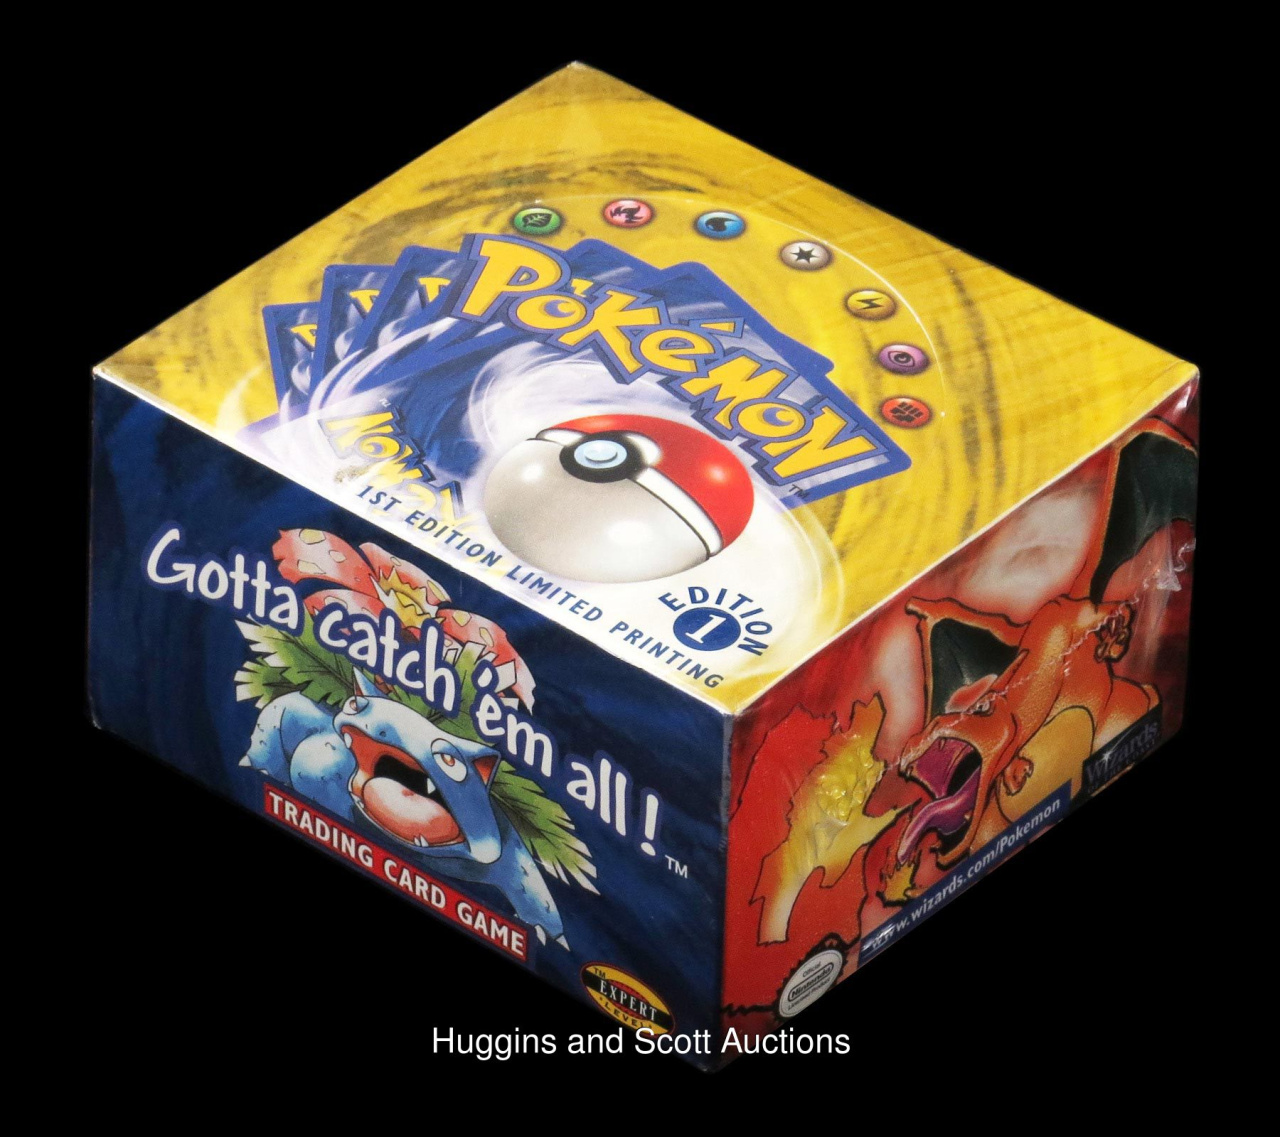 A Sealed Pokémon Trading Card Game Booster Box Just Sold For Nearly $70,000